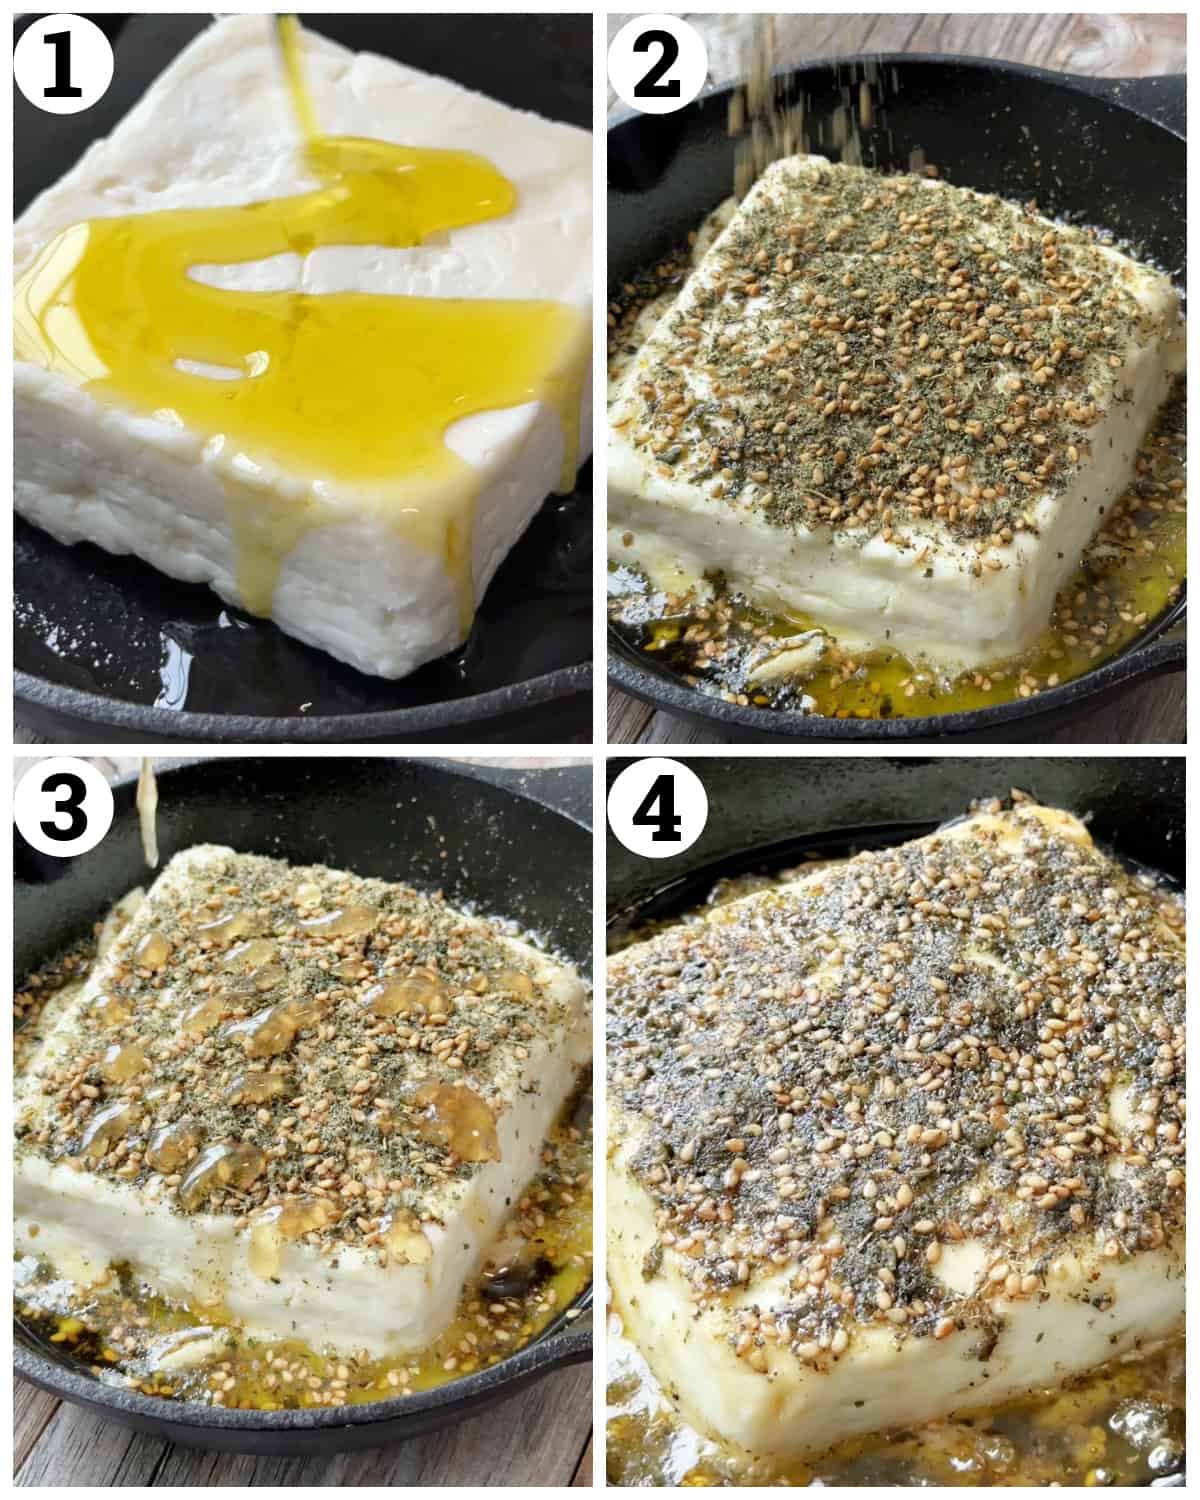 Bake the feta top with zaatar and honey and broil. 